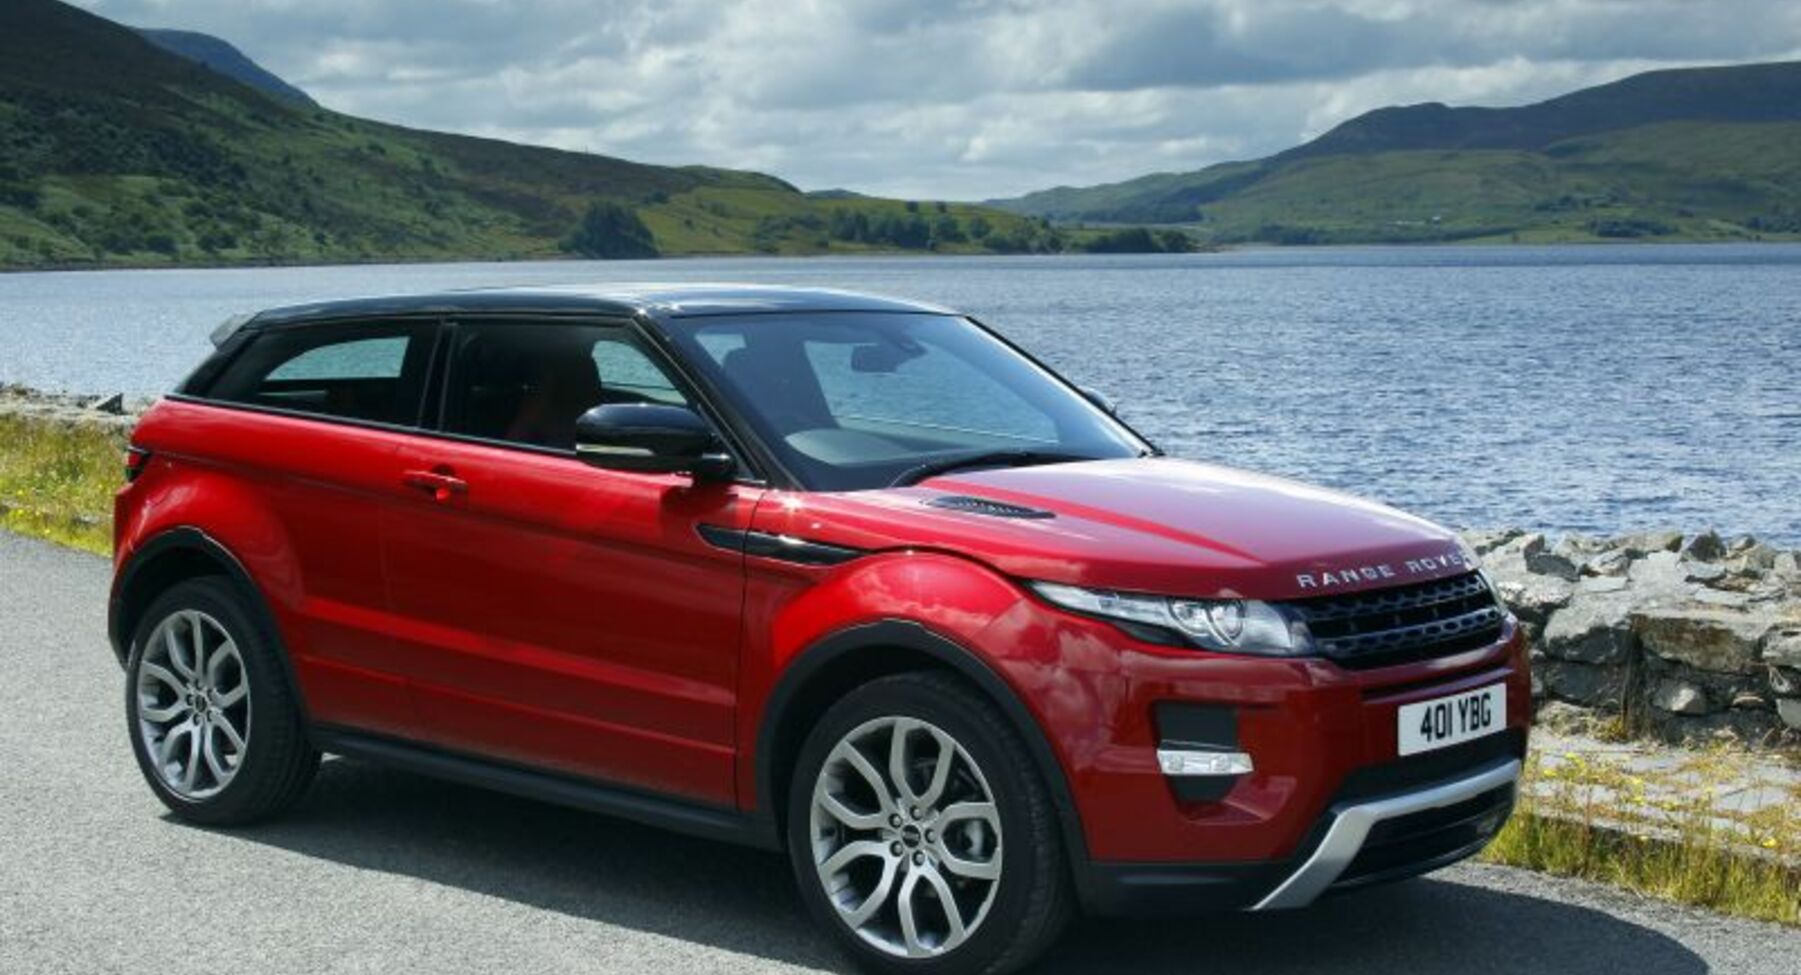 Land Rover Range Rover Evoque I coupe 2.0 Si4 (240 Hp) AWD Automatic 2012, 2013, 2014 